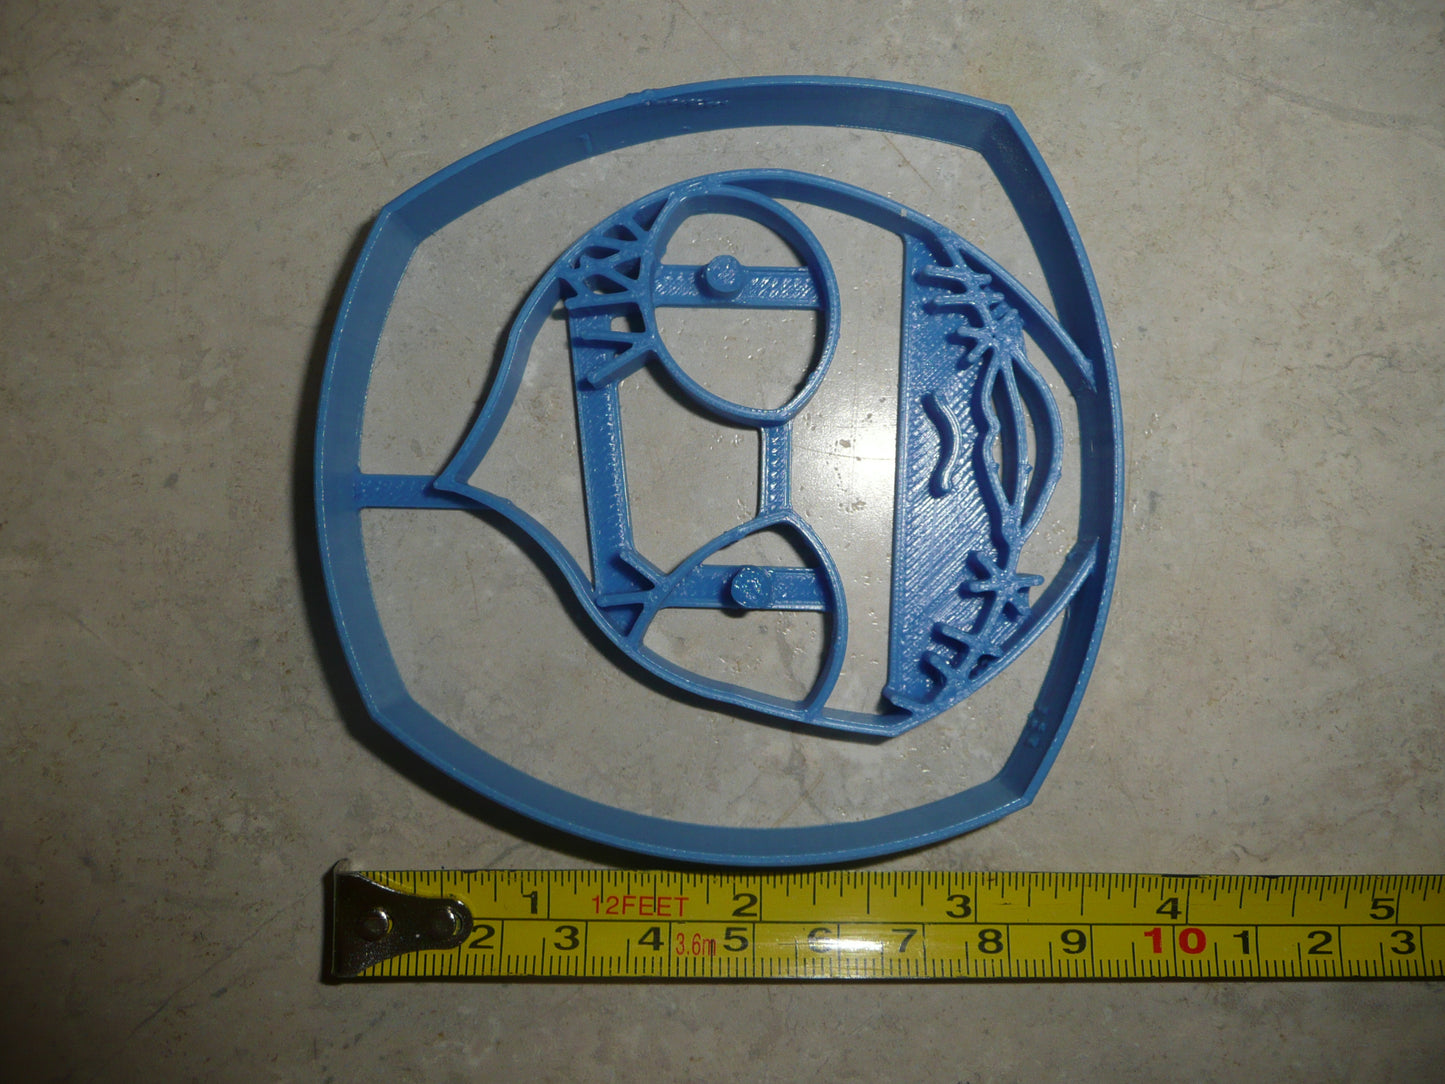 Sally Face Nightmare Before Christmas Cookie Cutter Made in USA PR3883